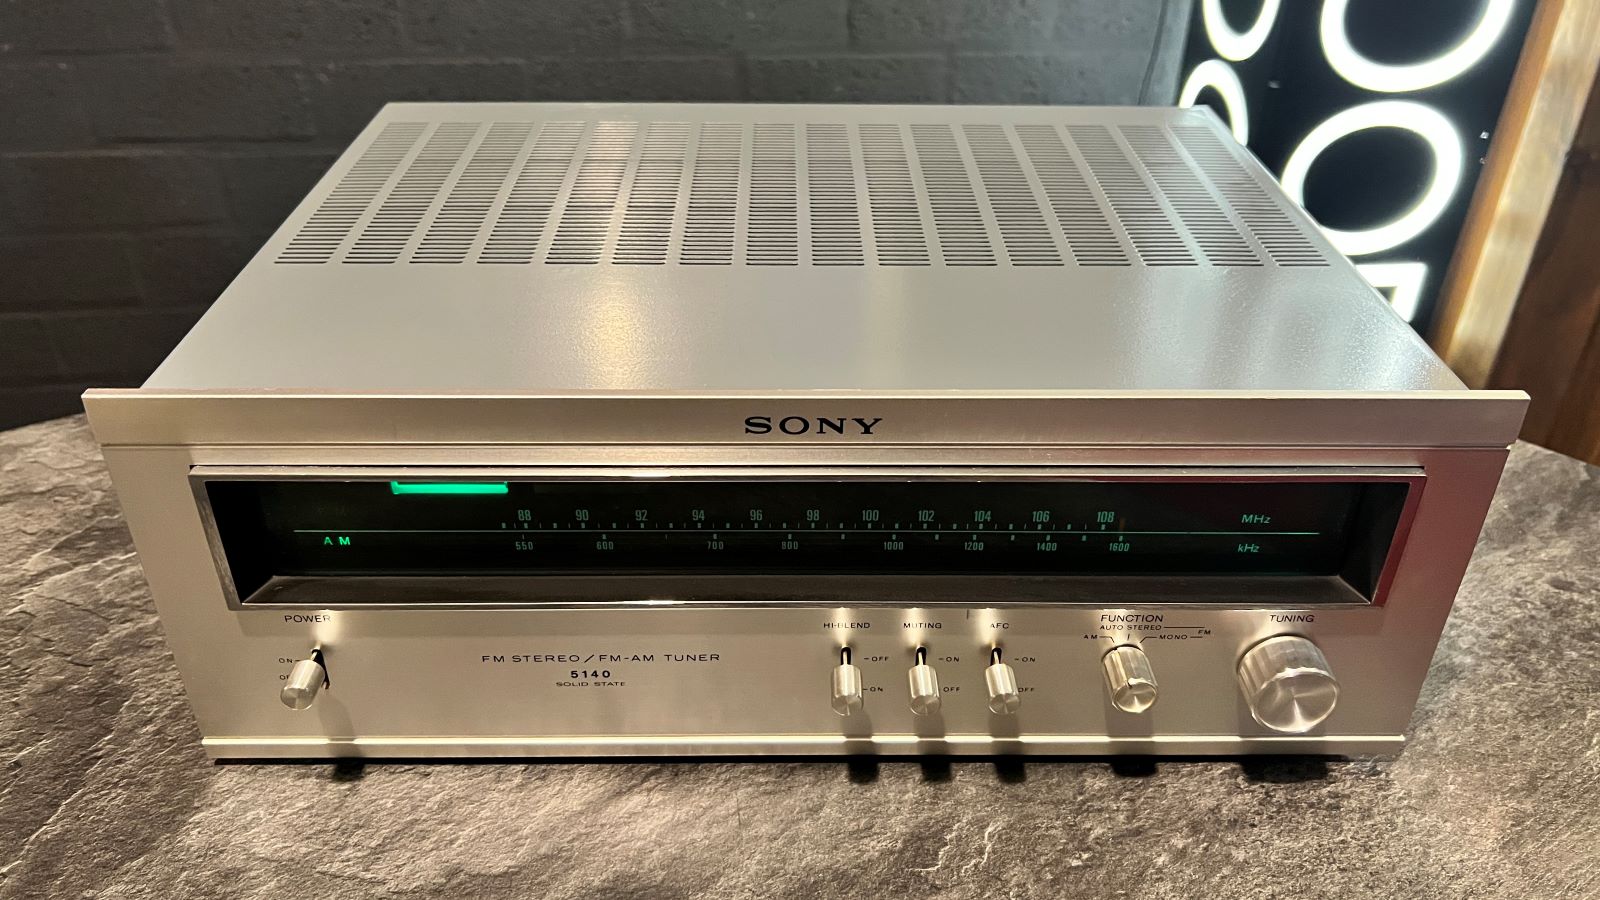 Sony ST-5140 AM/FM-stereotuner (1971-1974)